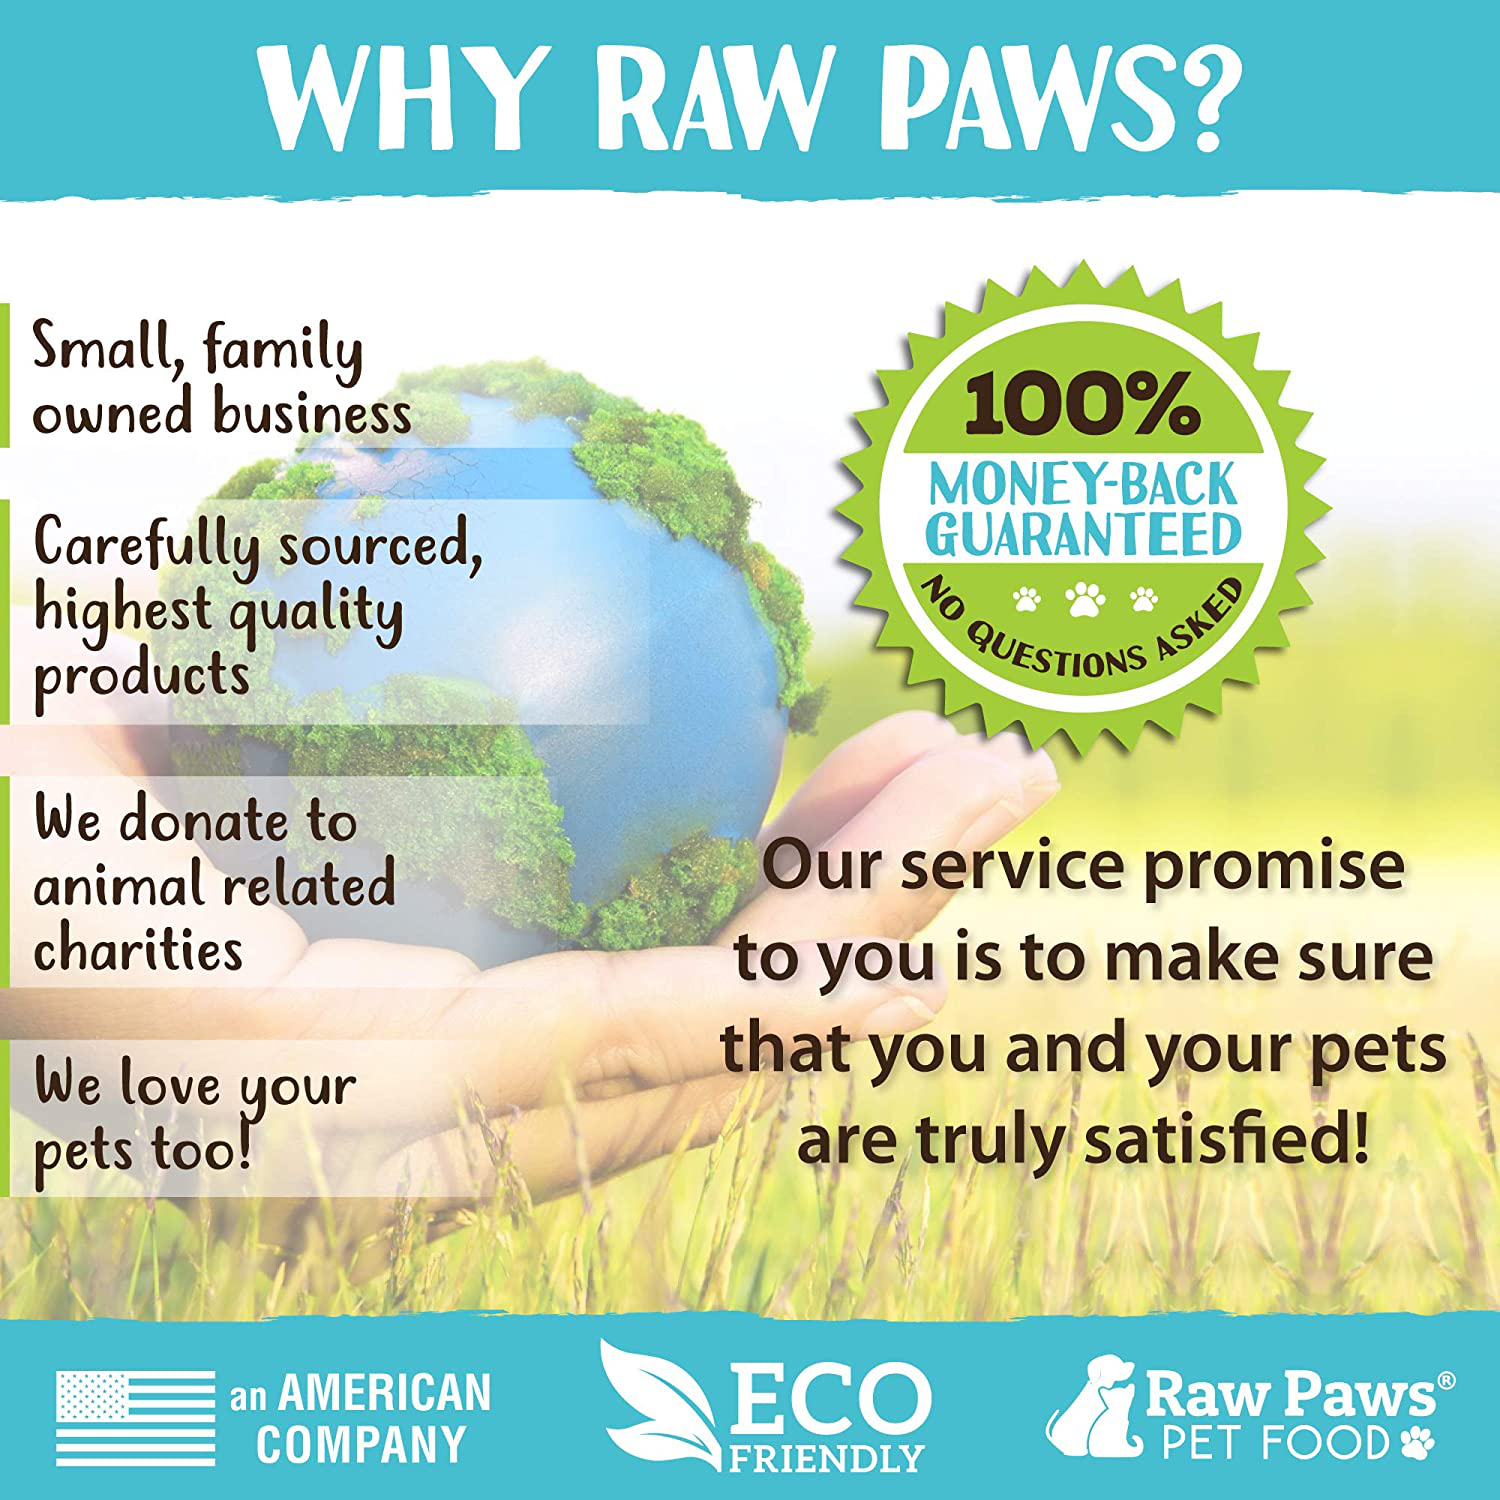 Raw Paws Freeze Dried Raw Ferret Food, Beef 16-Oz - Made in USA - Premium, Grain Free Ferret Diet for Small, Adult, Senior & Baby Ferrets - Also Use as Natural Ferret Treats for Rewarding & Training